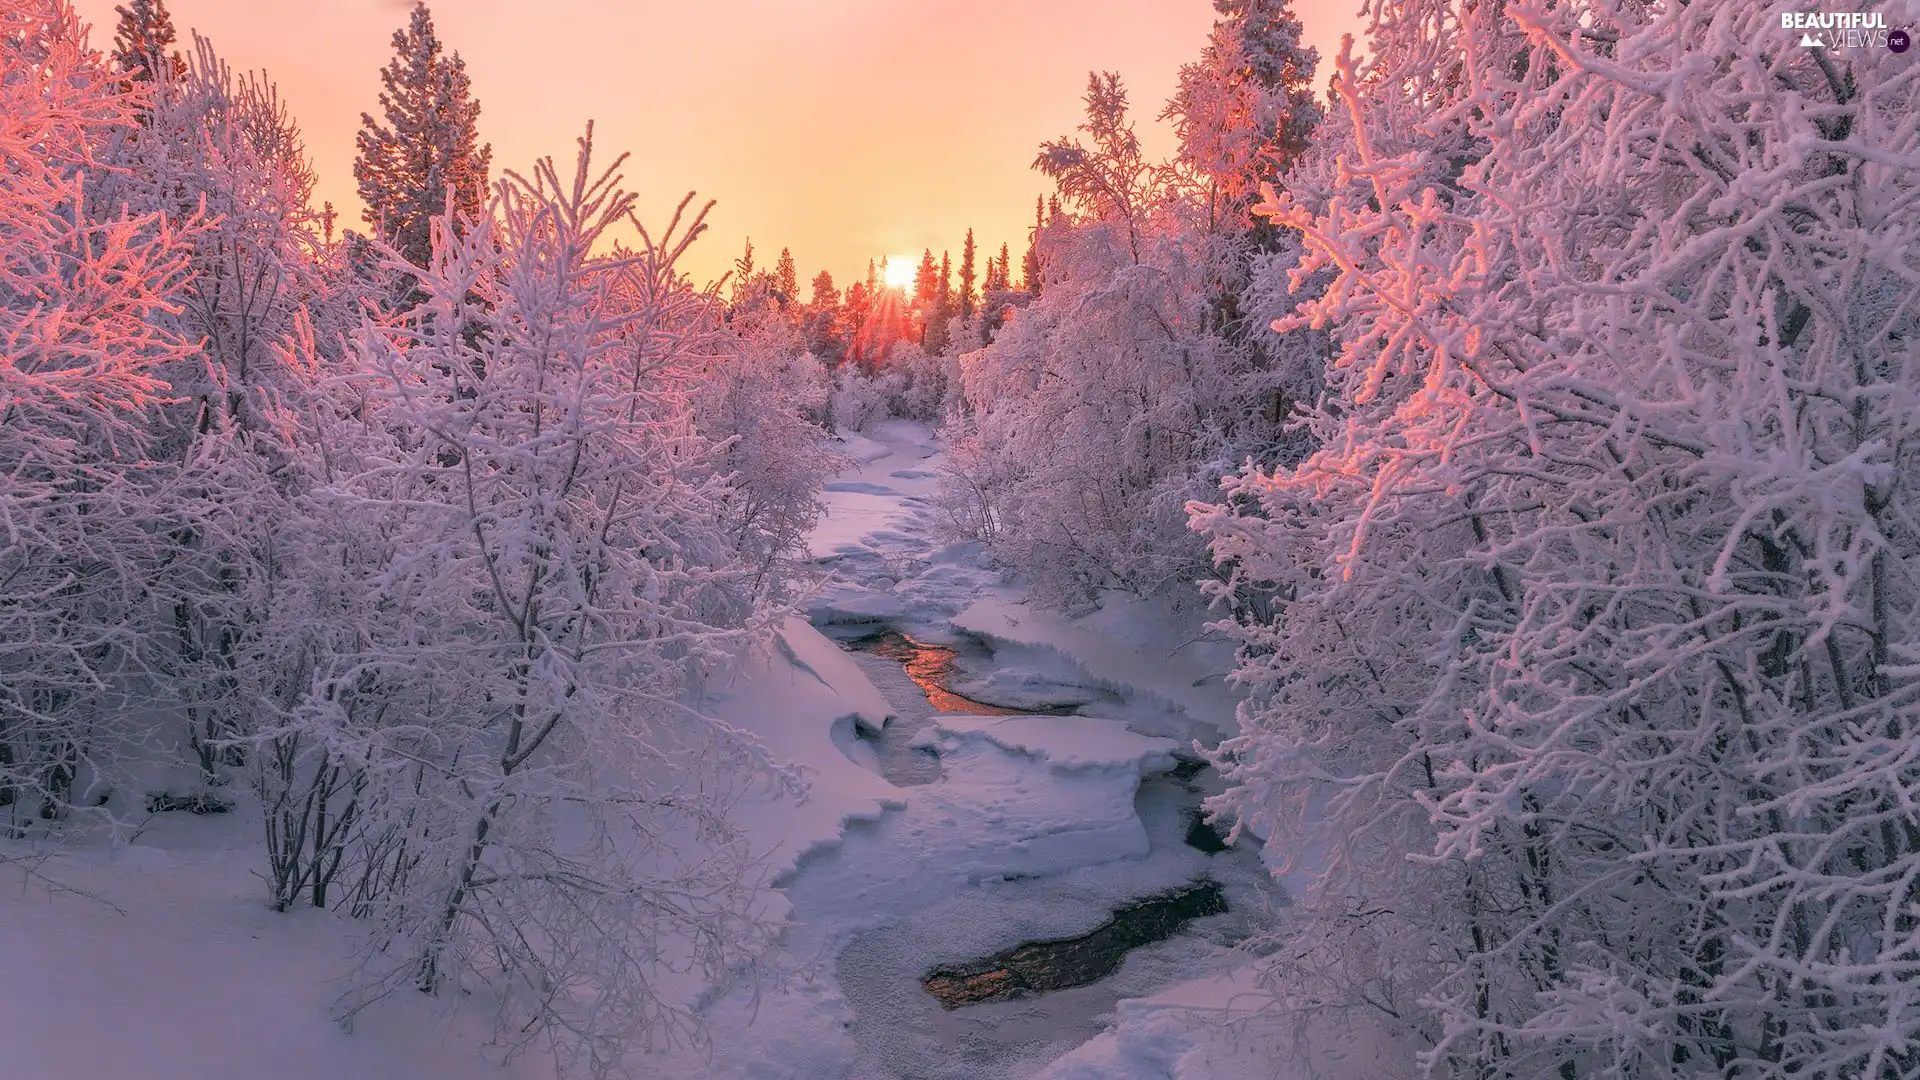 Sunrise, winter, viewes, Snowy, trees, River